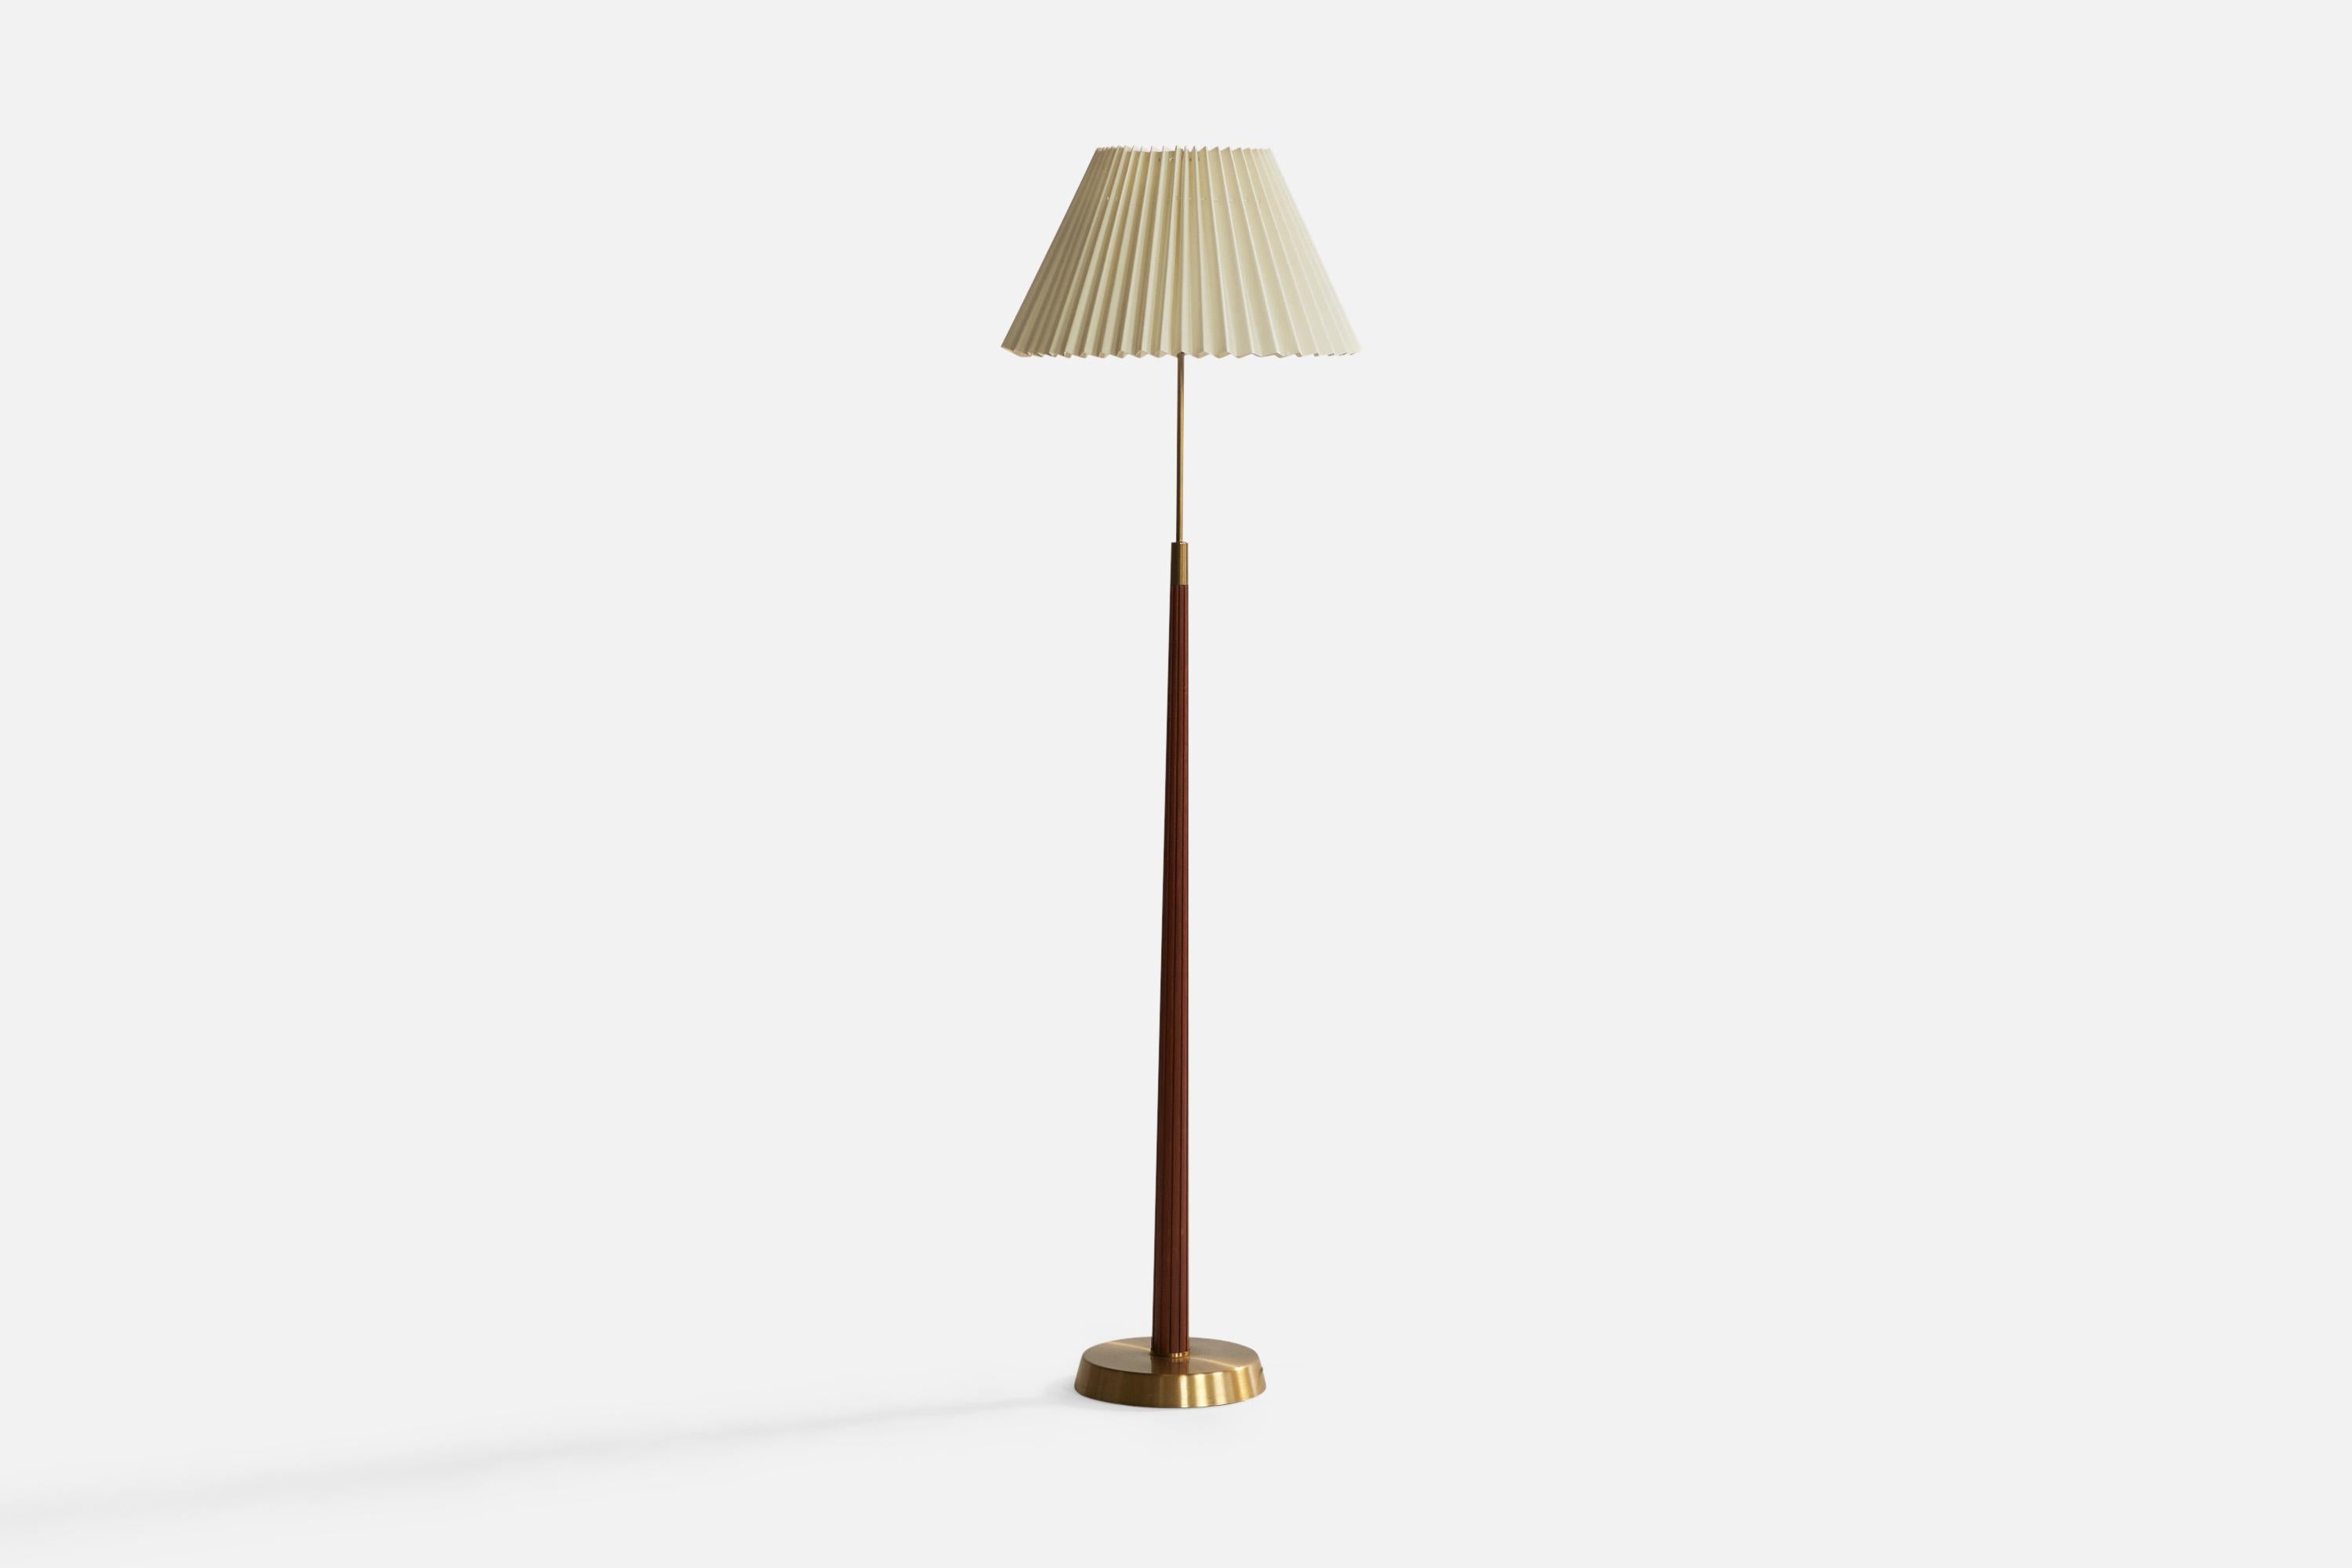 A brass, elm and off white fabric floor lamp designed by Hans Bergström and produced by ASEA, Sweden, 1940s.

Overall Dimensions (inches): 62.6” H x 17.5” Diameter. Stated dimensions include shade.
Bulb Specifications: E-26 Bulb
Number of Sockets: